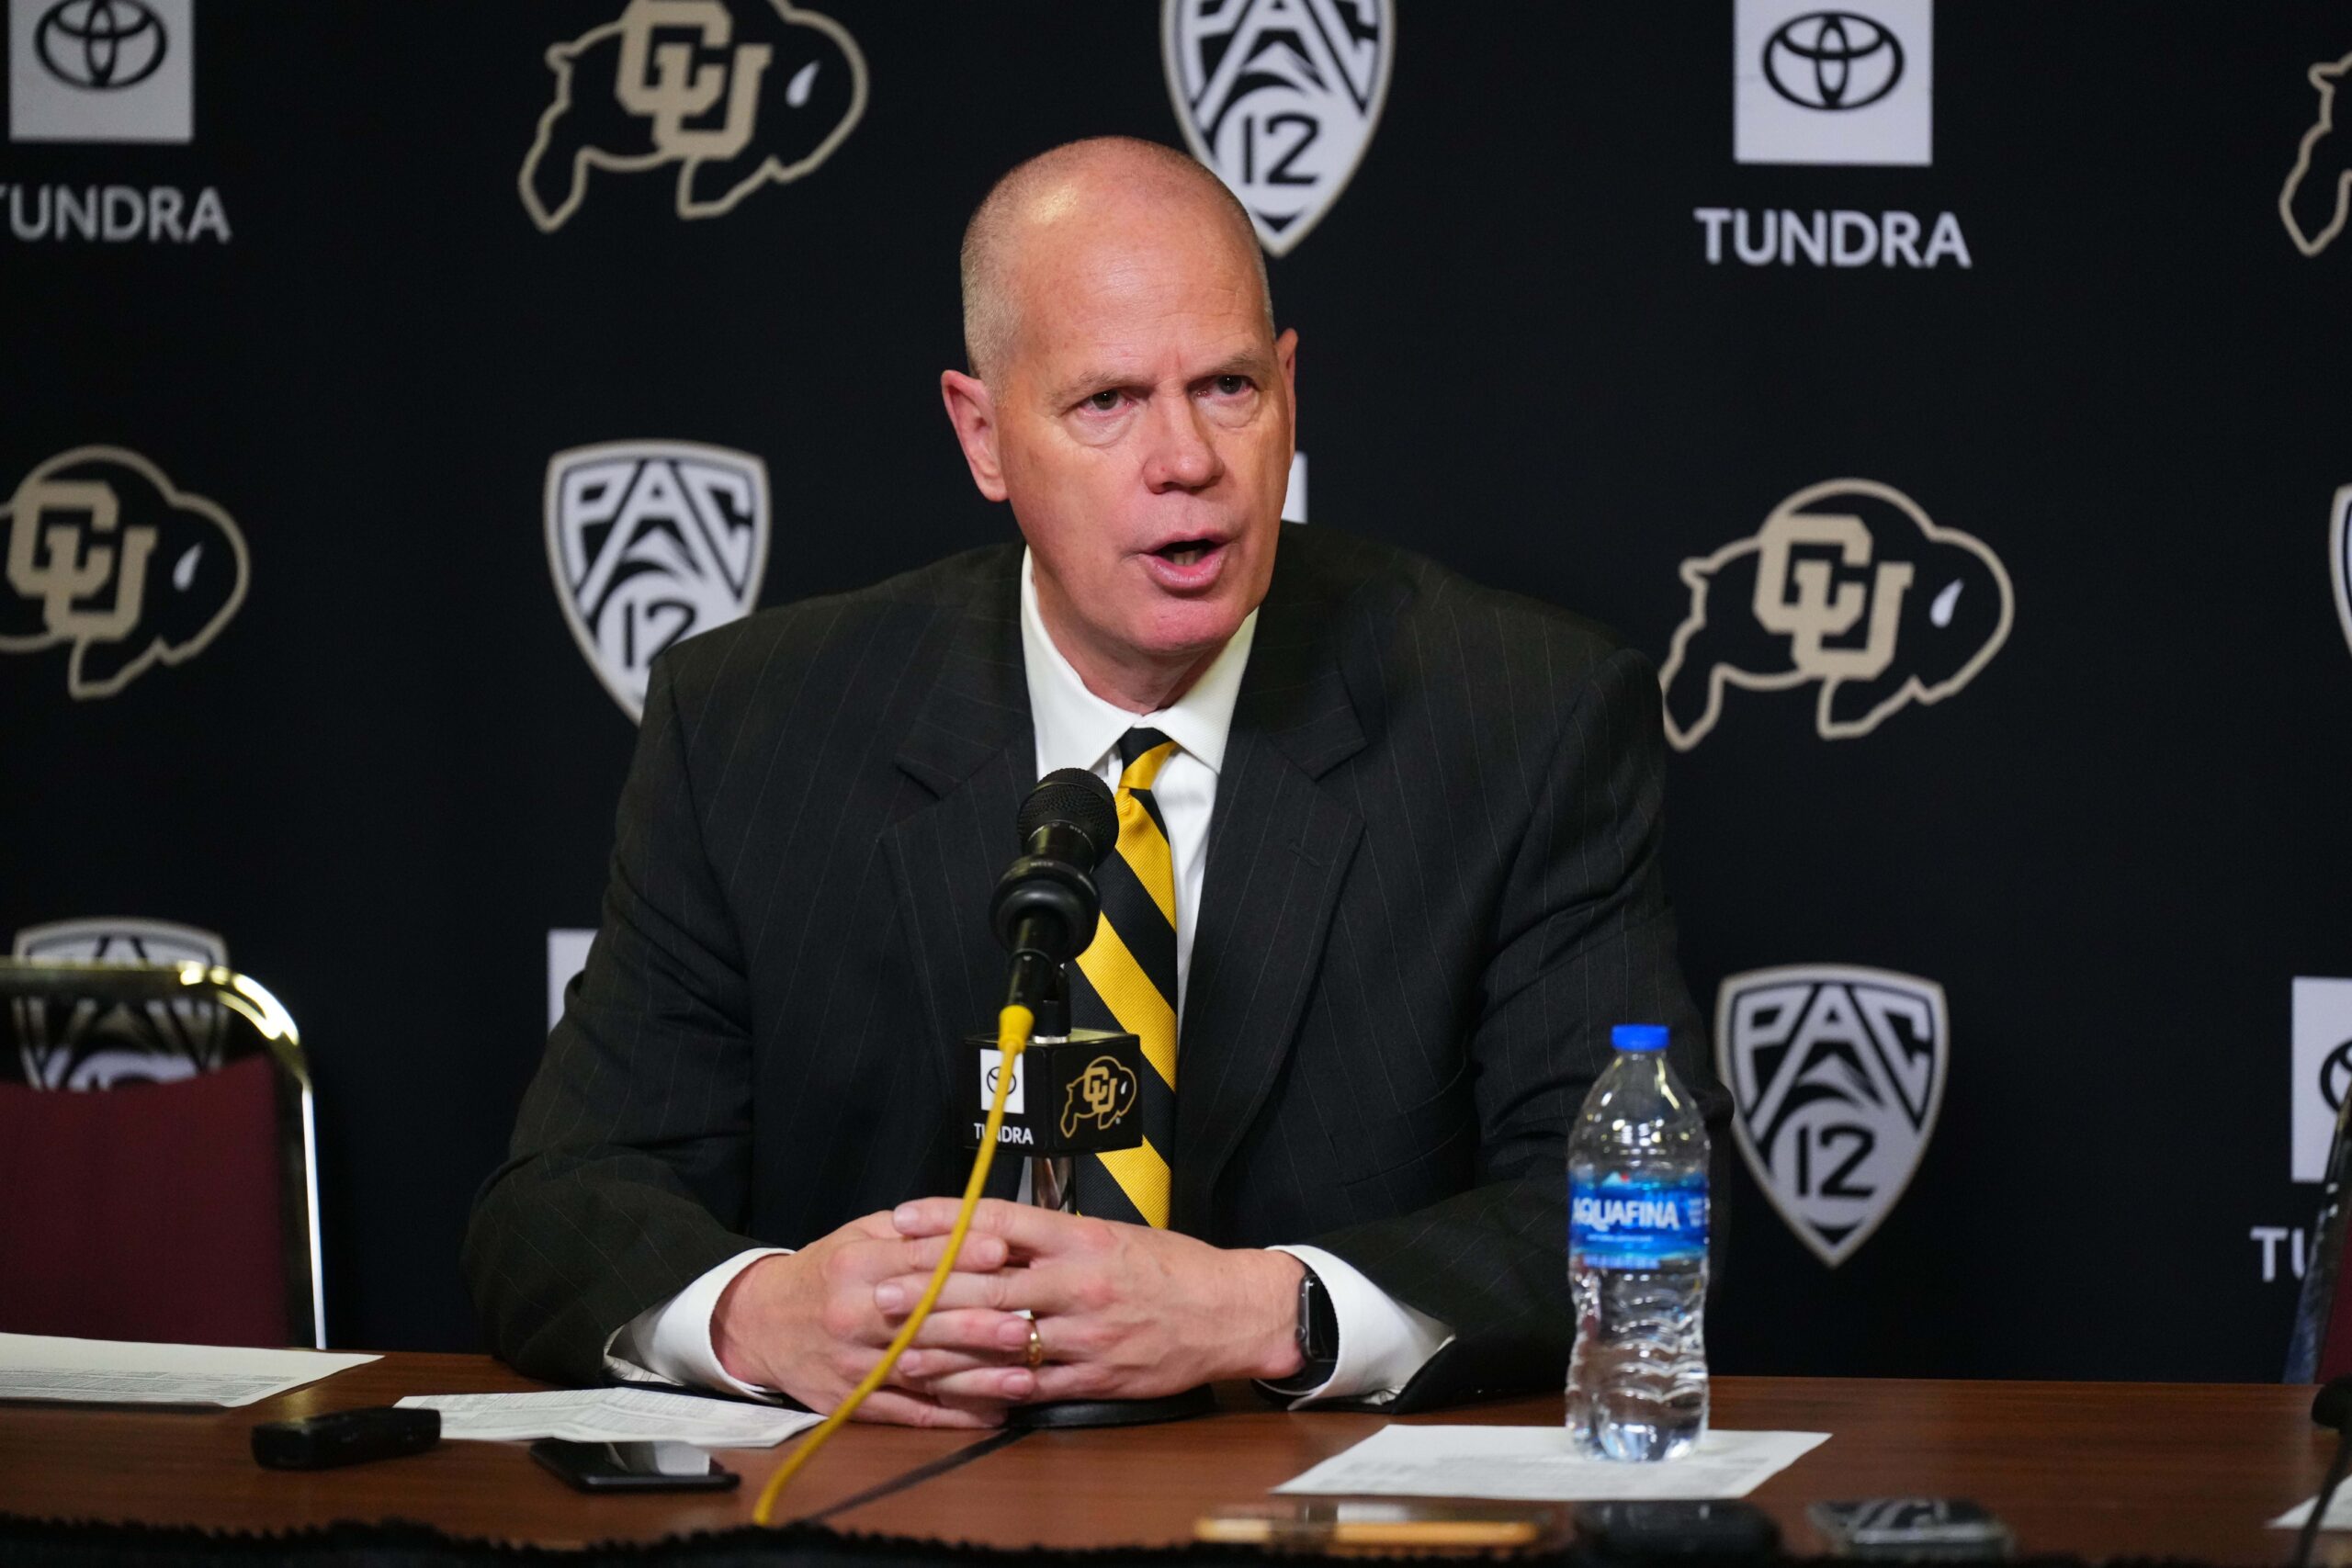 Tad Boyle and Colorado have a workable non-conference schedule entering their first season in the Big 12.